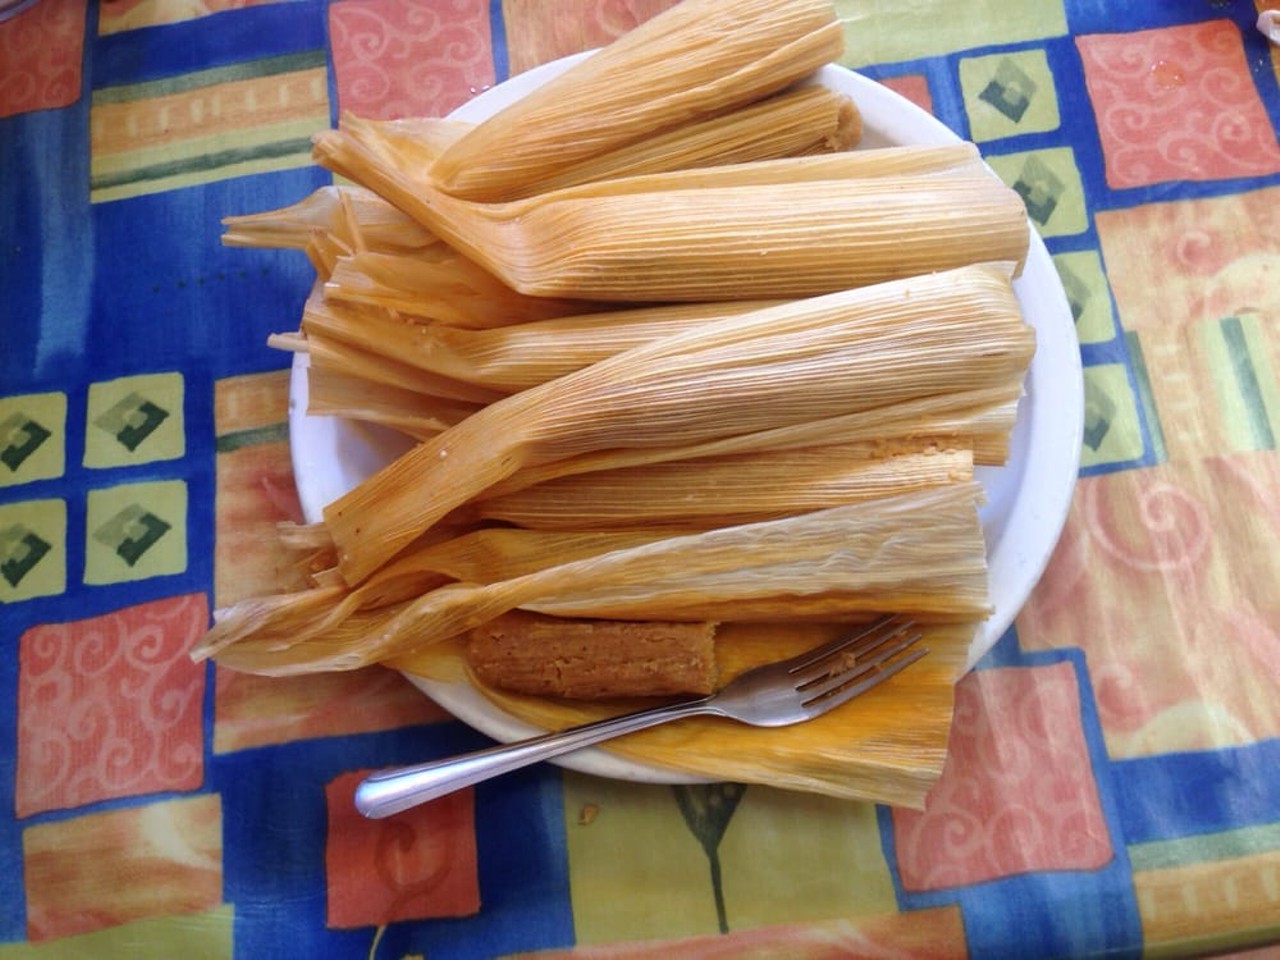 Evie&#146;s Tamales
3454 Bagley St., Detroit; 313-843-5056
Situated in a dense strip of Bagley Avenue in Mexicantown, Evie's Tamales has been serving its cornhusk-wrapped tamales for over three decades. Their 99 cent breakfast burrito is no joke. 
Photo via  Yelp, Kathy H.